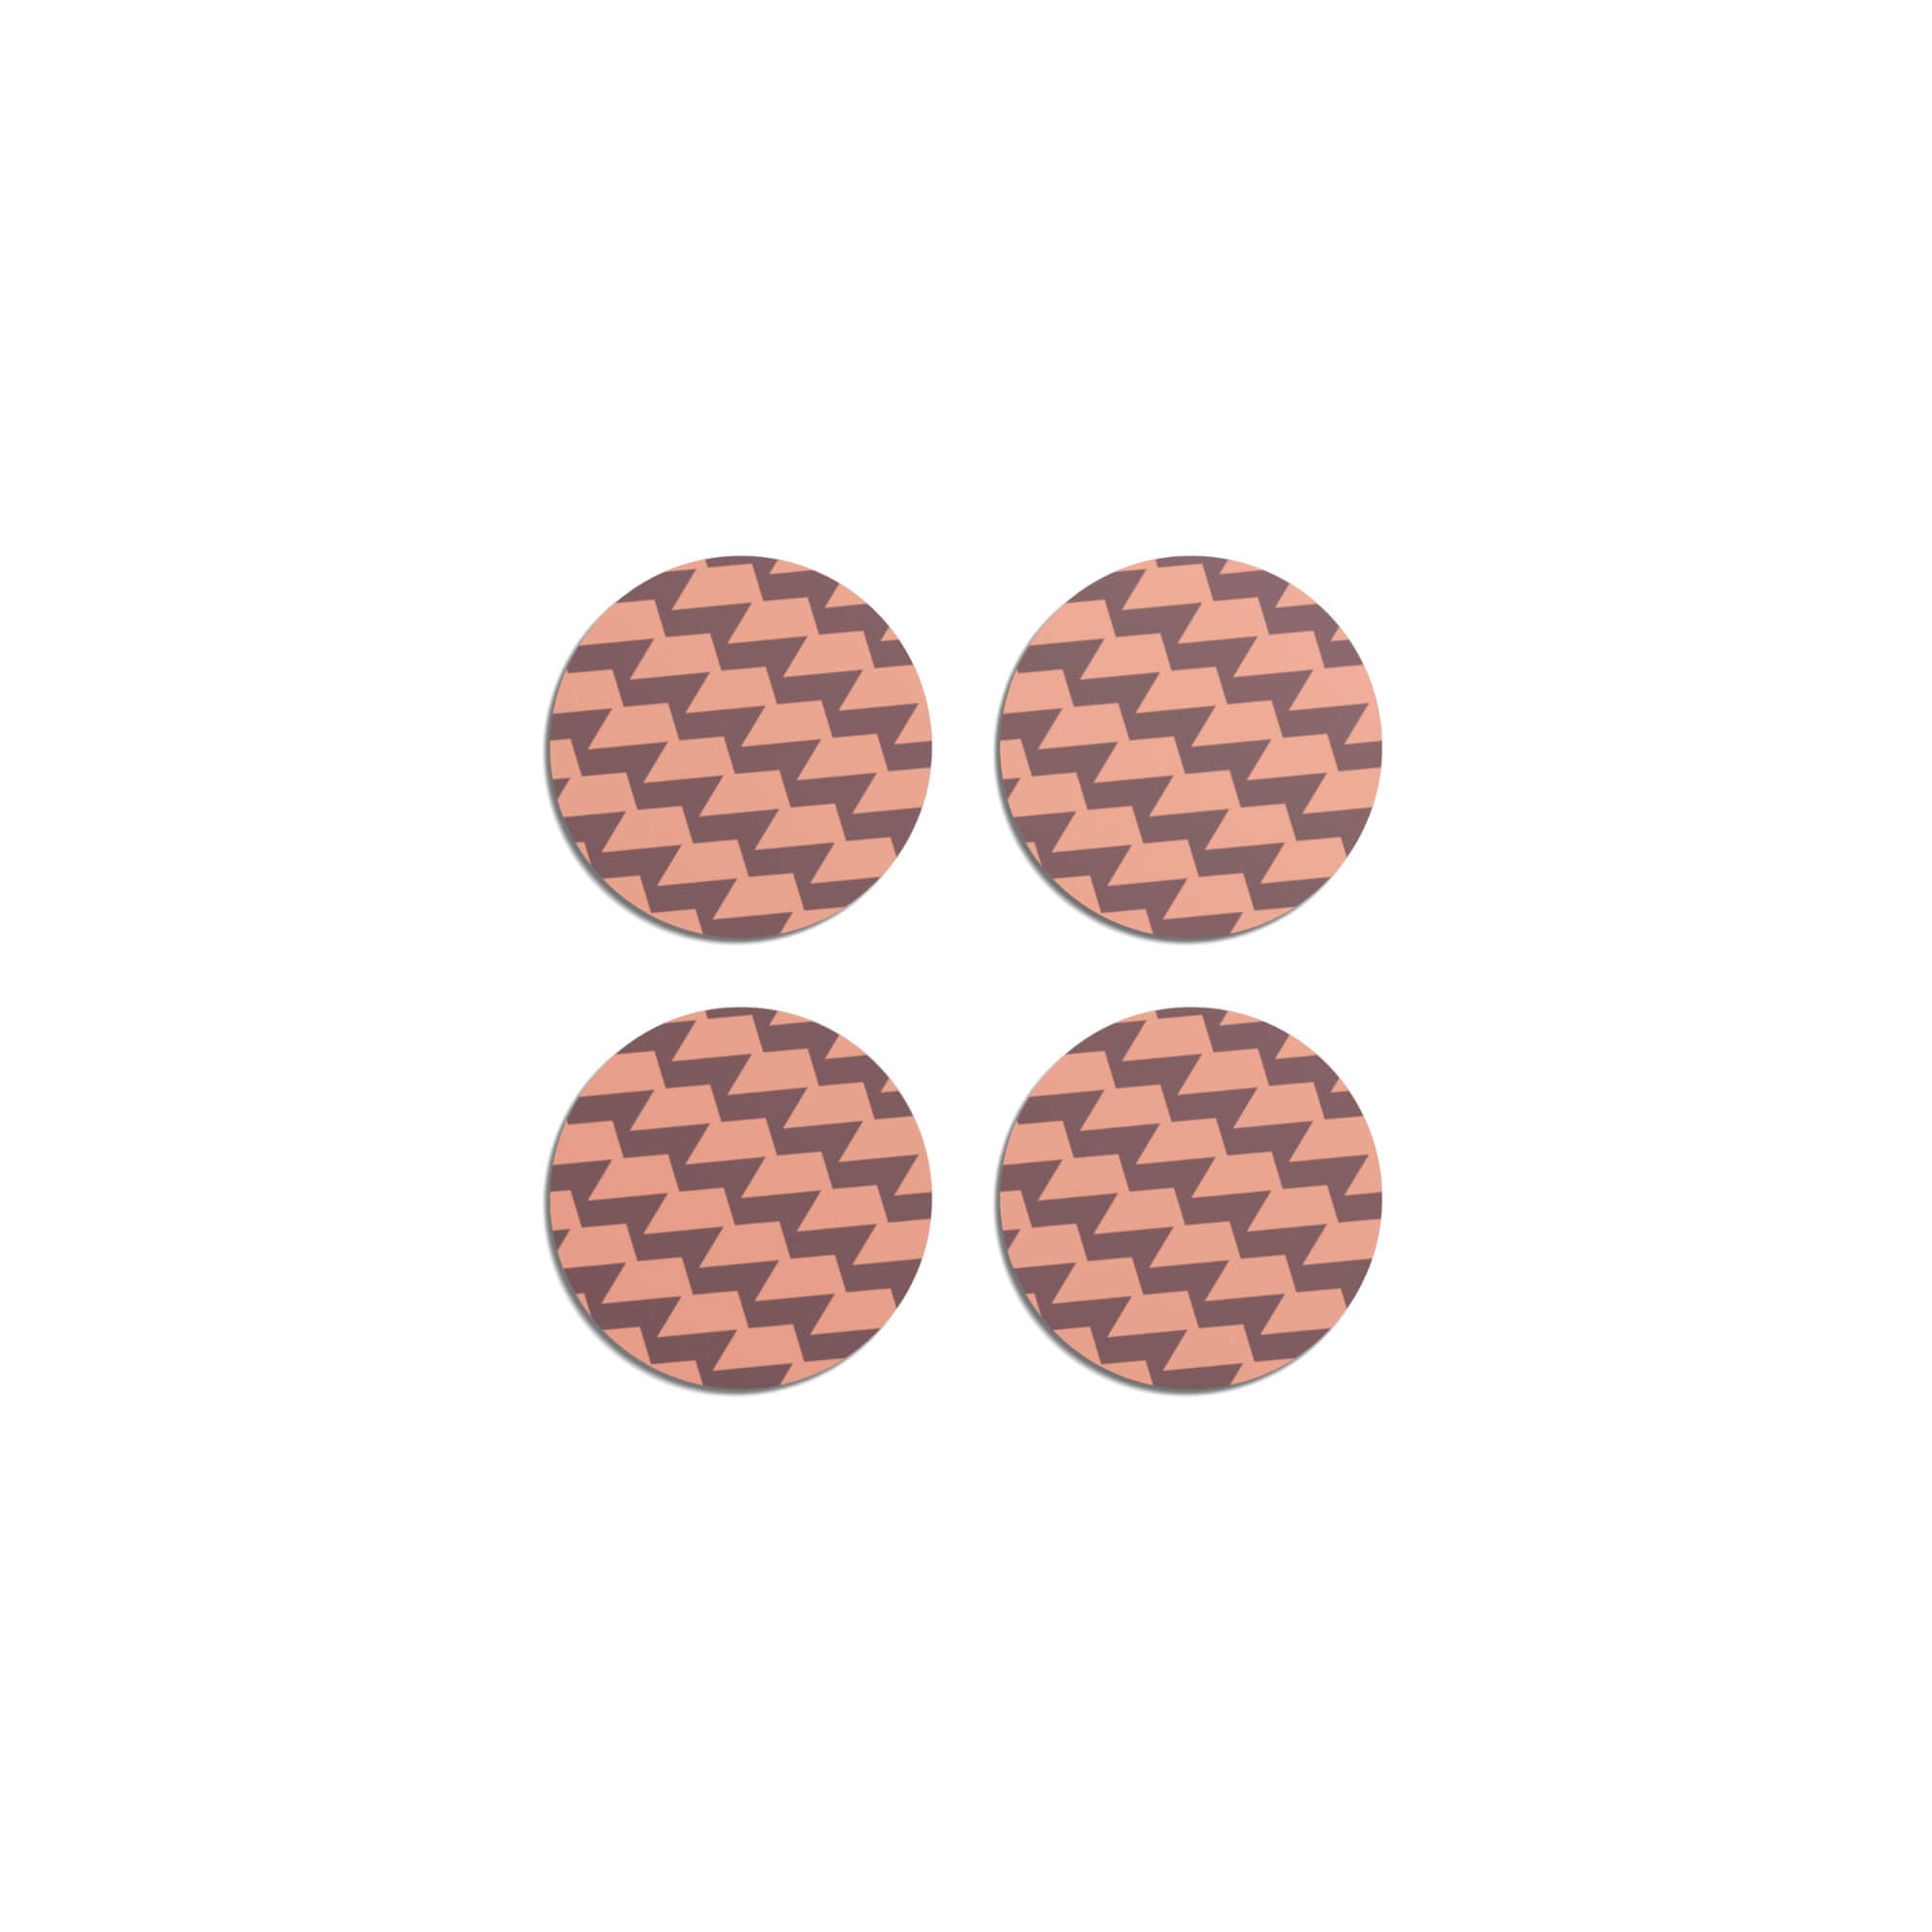 HappyTrays wooden coasters Ø 9 cm double-sided - set of 4